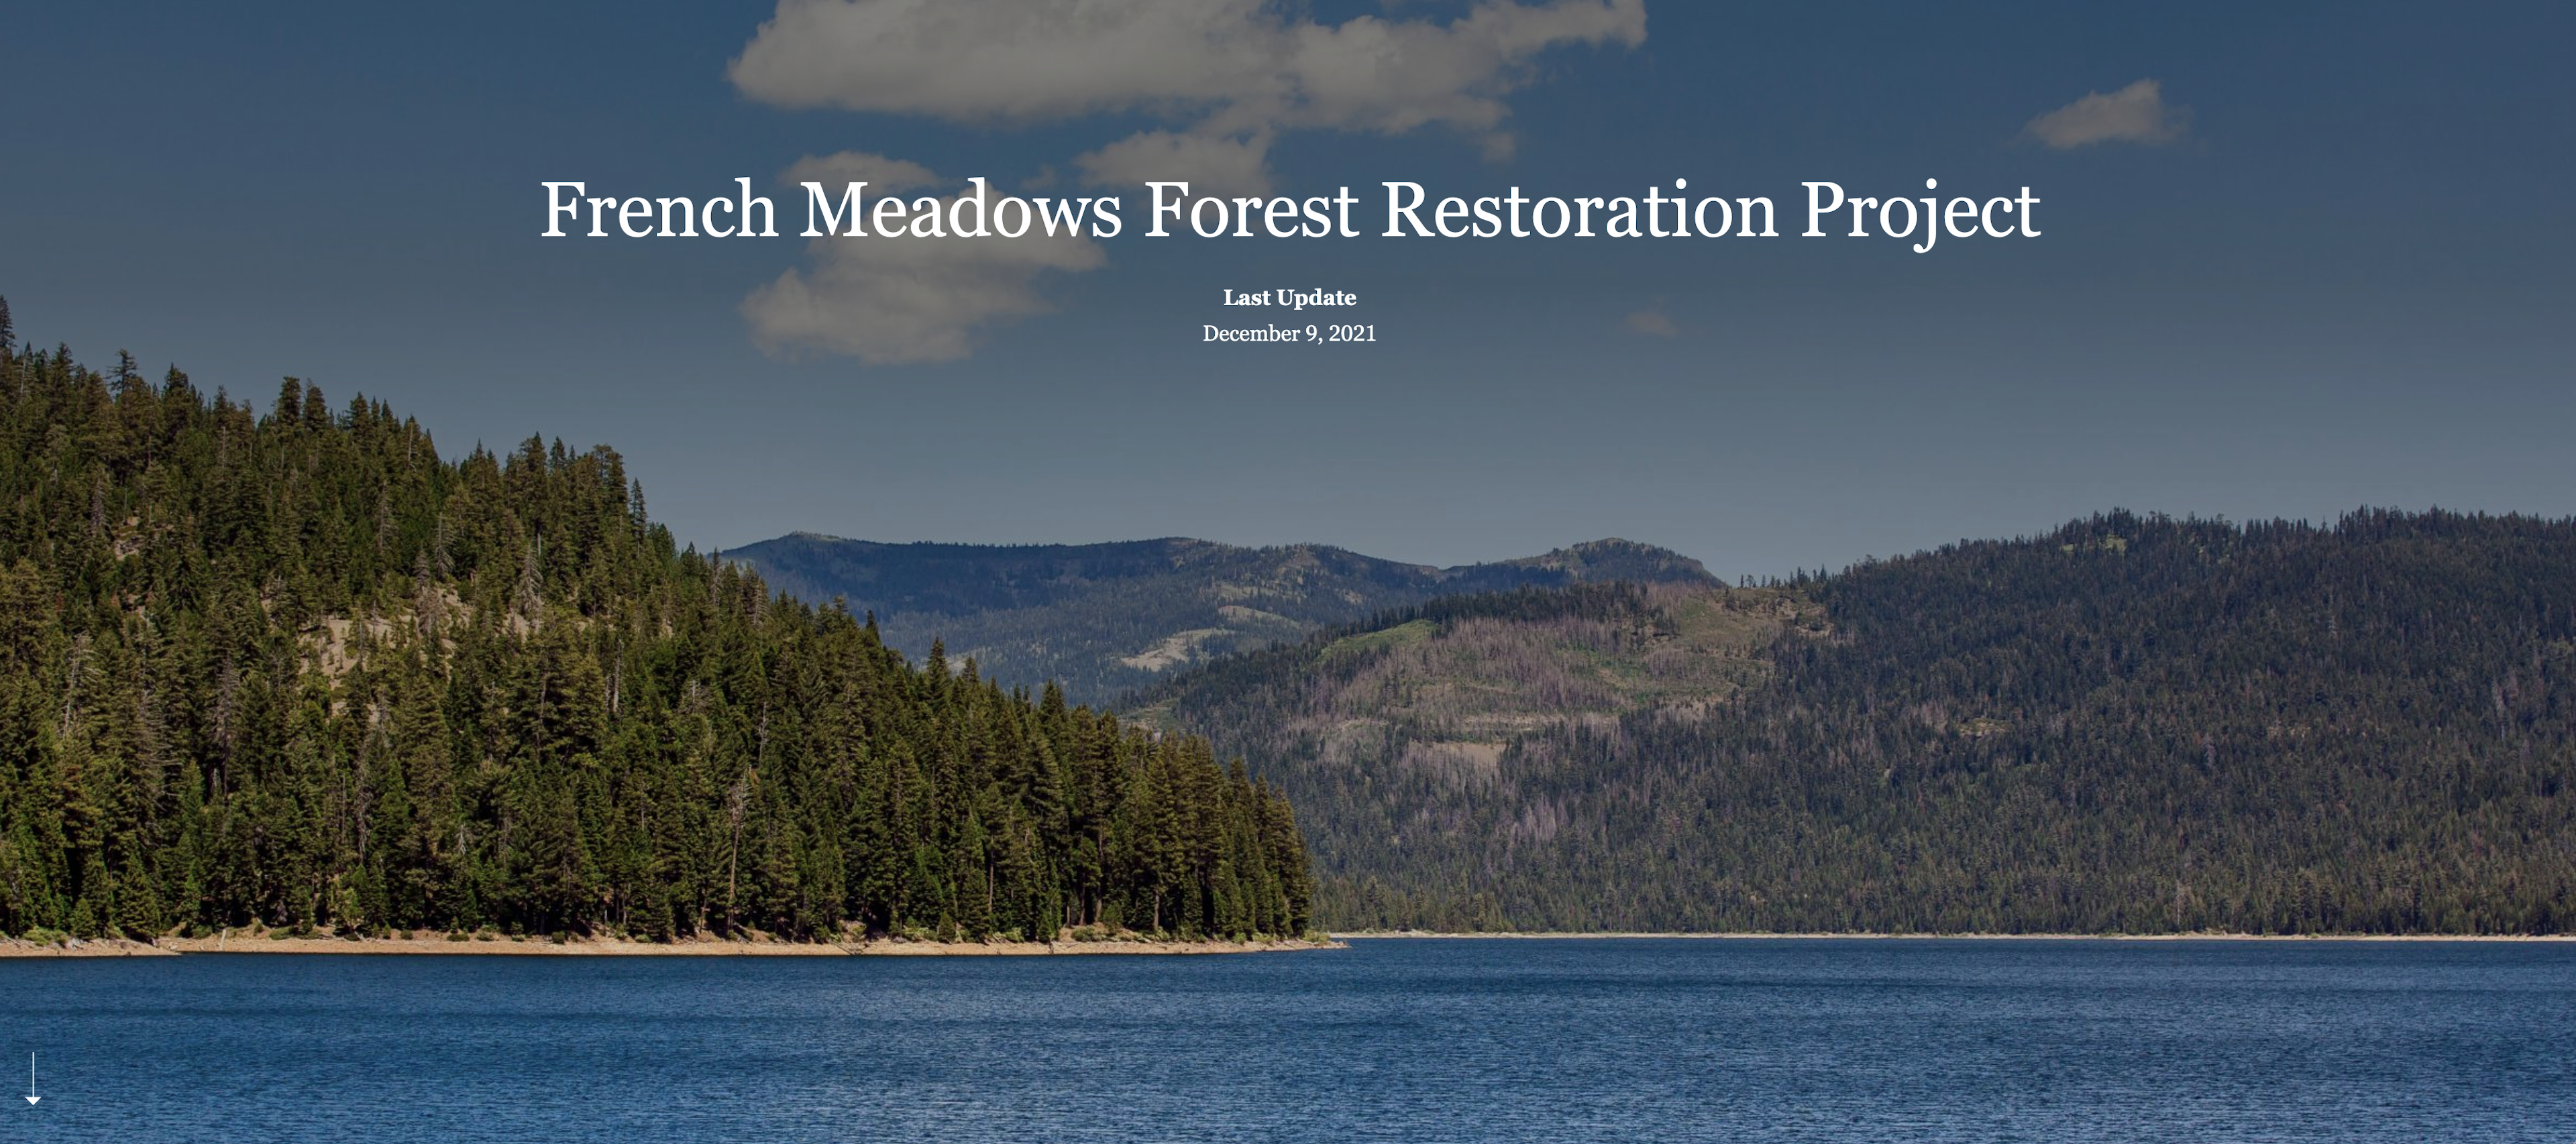 French Meadows Forest Restoration Project, an interactive story map